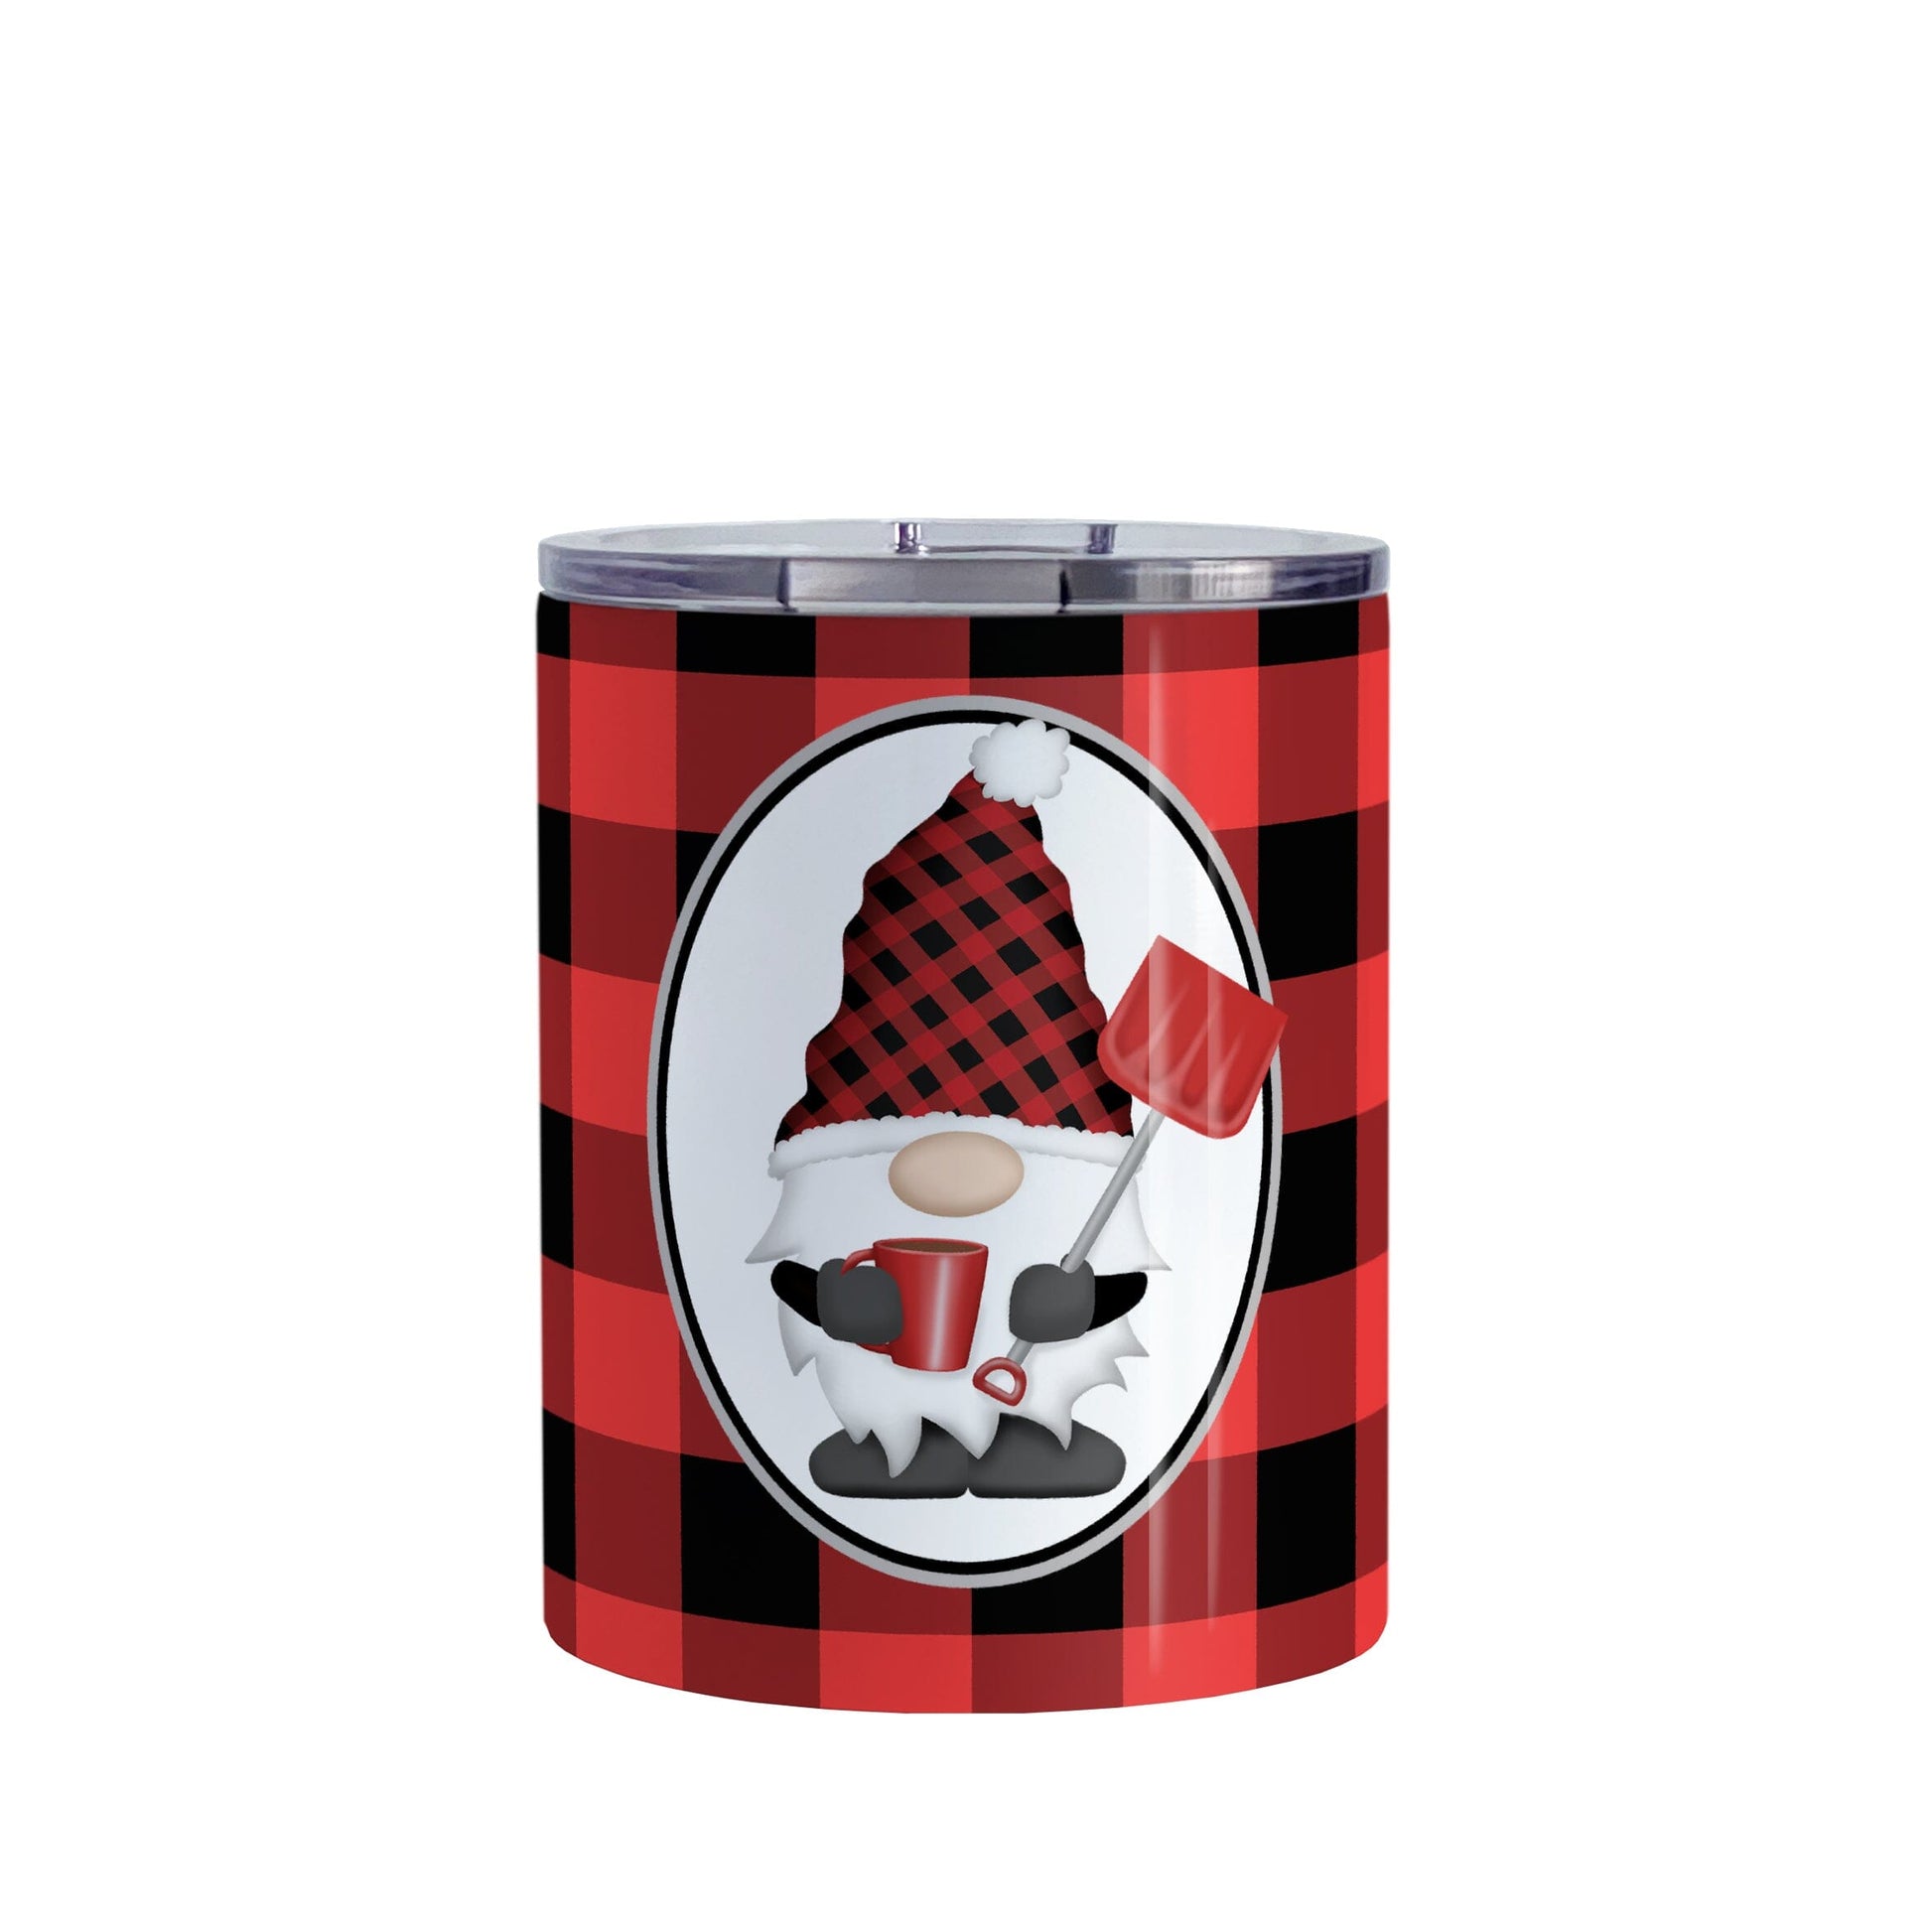 Red Gnome Buffalo Plaid Tumbler Cup (10oz) at Amy's Coffee Mugs. A stainless steel tumbler cup designed with an adorable gnome wearing a red and black buffalo check hat and holding a hot beverage and a snow shovel in a white oval over a red and black buffalo plaid pattern background that wraps around the cup.